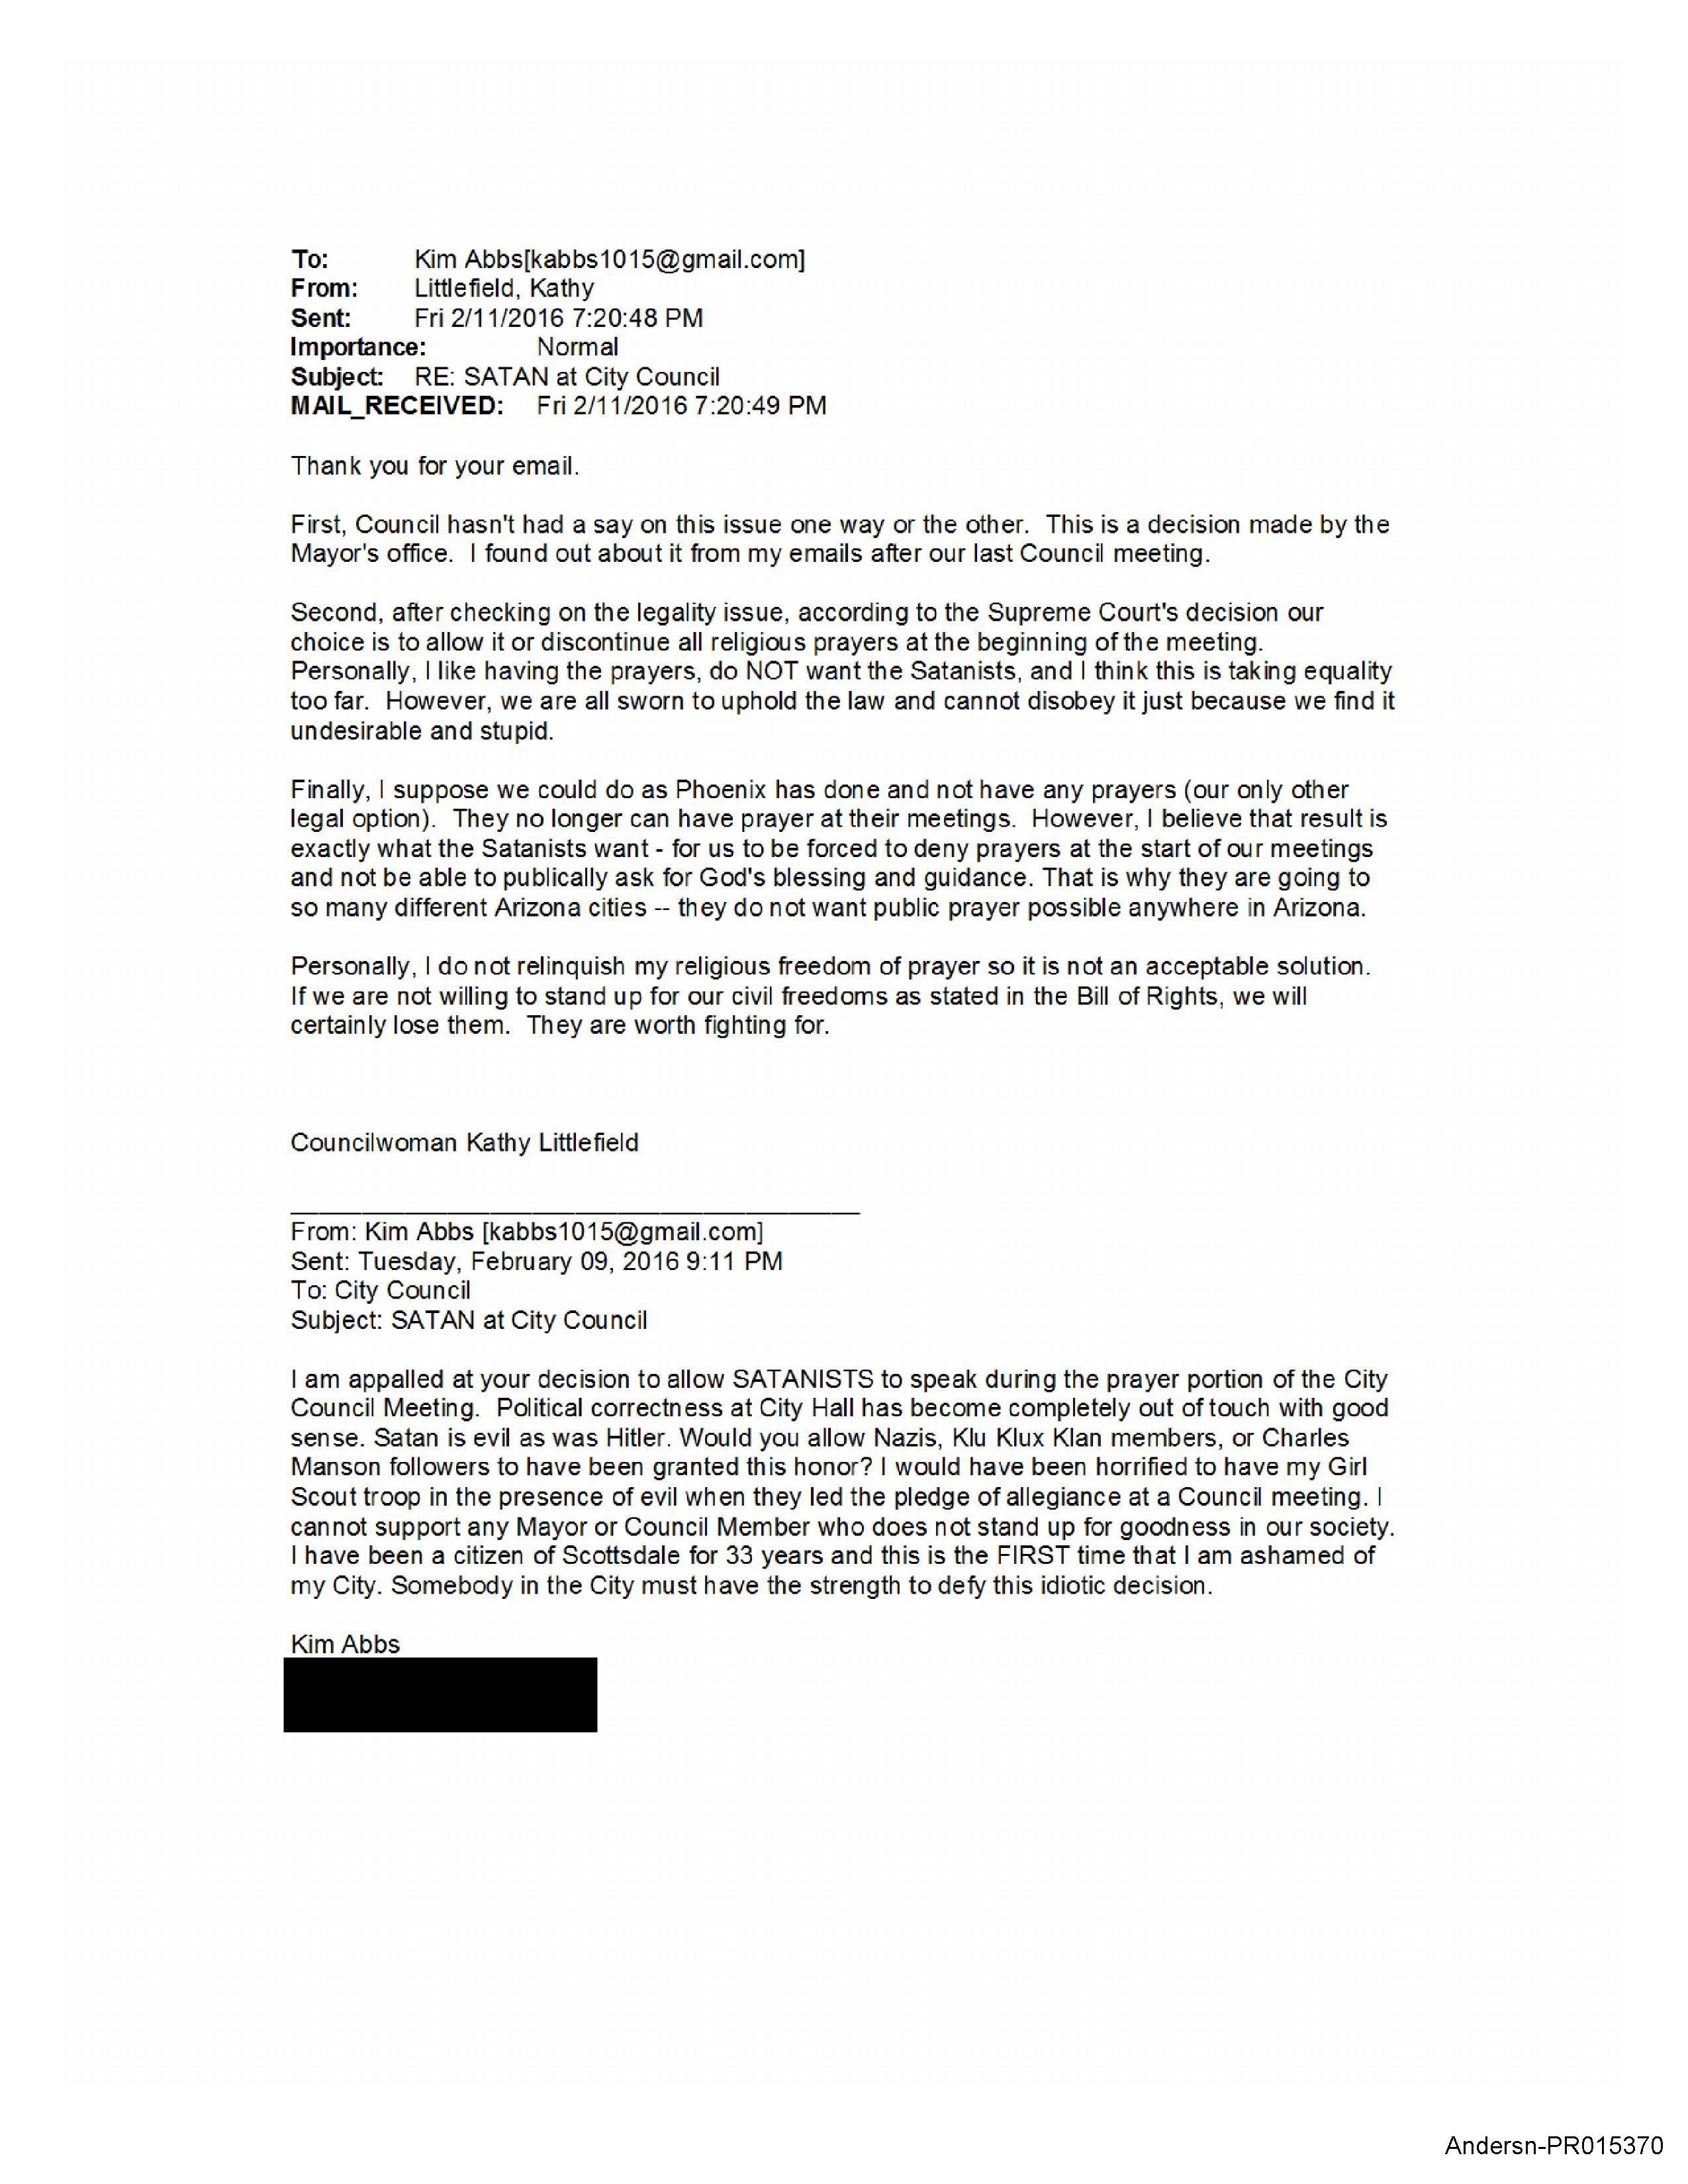 Email from Scottsdale Council Woman Kathy Littlefield to a concerned citizen about a Satanist invocation. (Public Record)